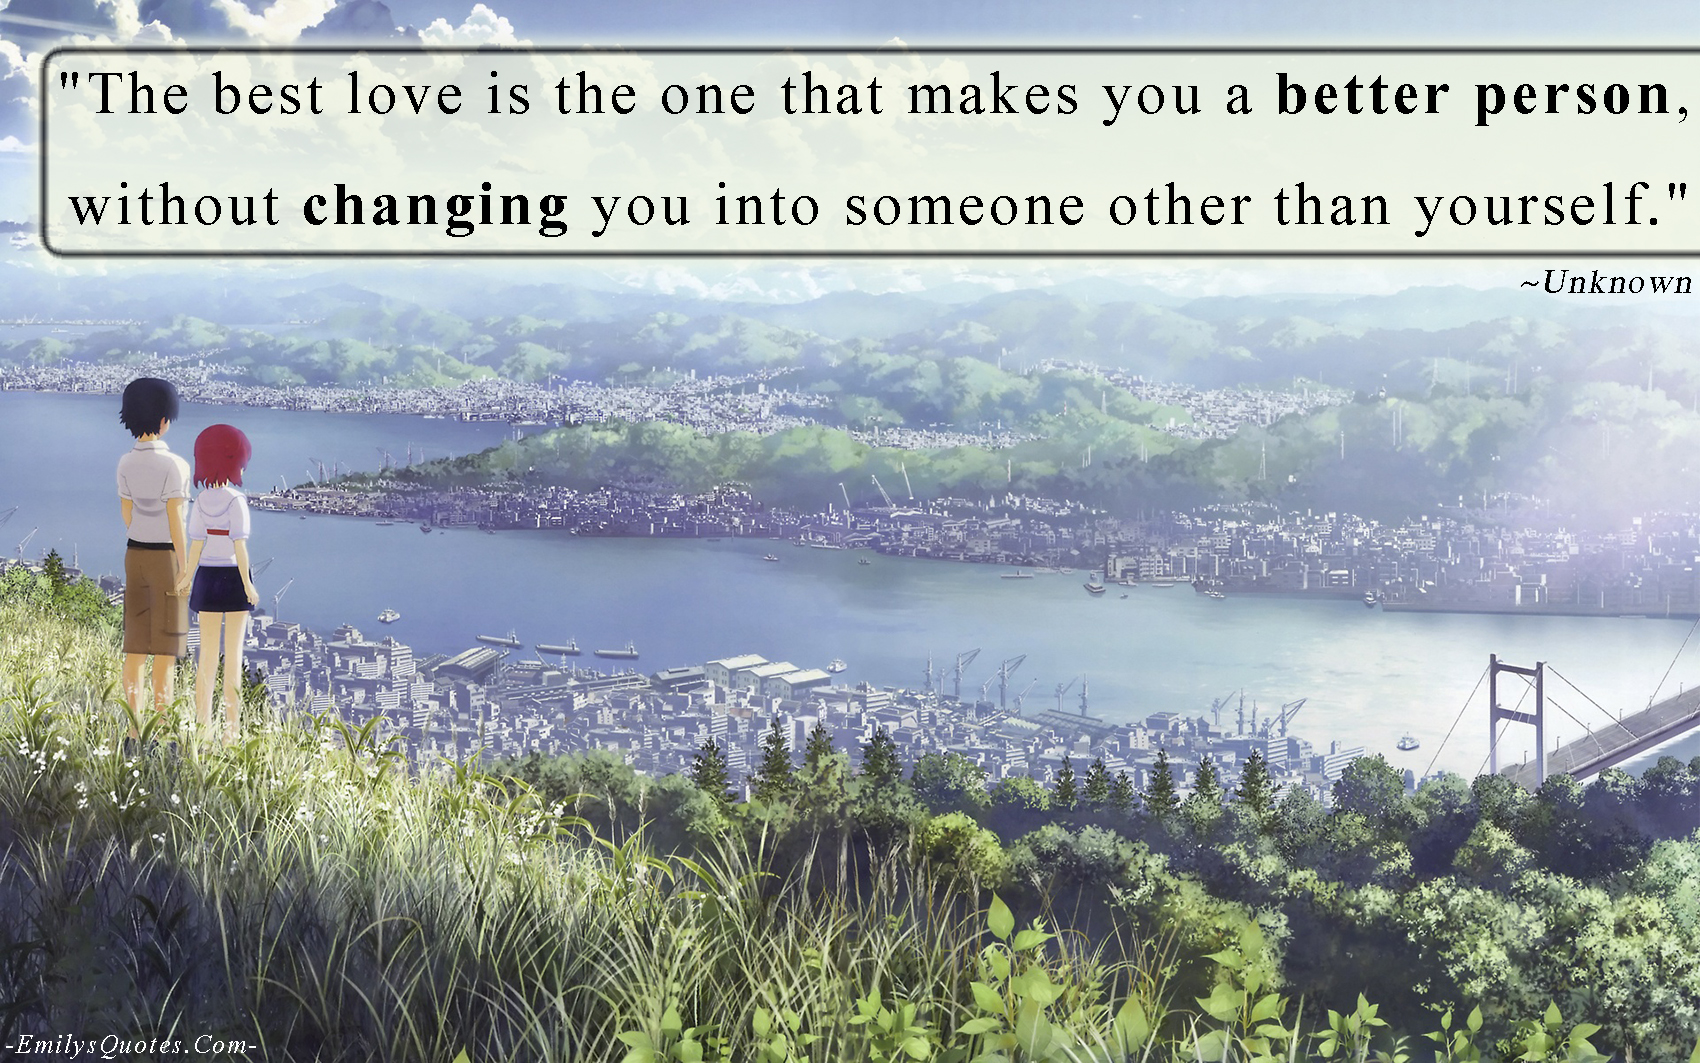 The best love is the one that makes you a better person, without changing you into someone other than yourself